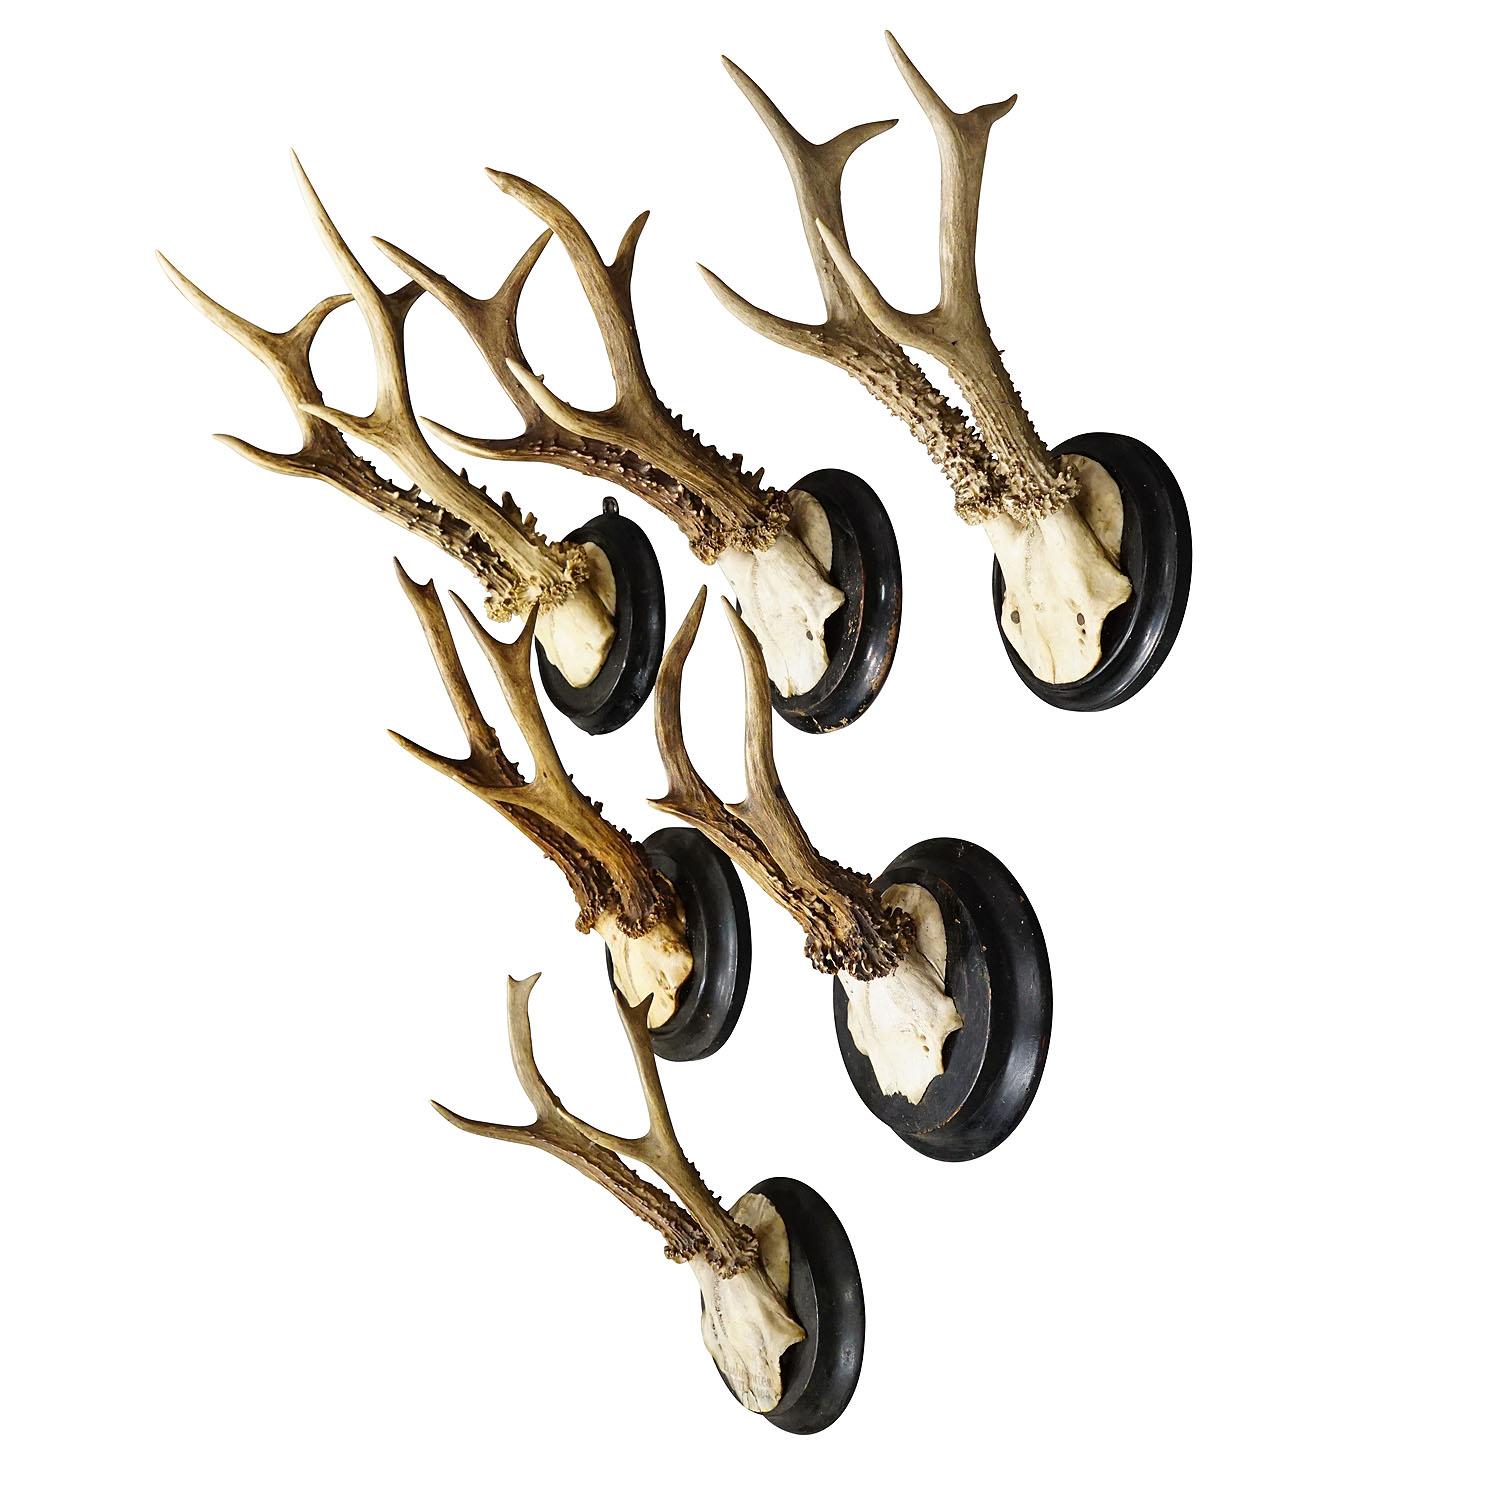 Six Large Roe Deer Trophies on Turned Plaques Germany Early 20. Century

A set of six large Black Forest roe deer (Capreolus capreolus) trophies mounted on turned wooden plaques. The trophies were shot in Germany in the early 20th century. One